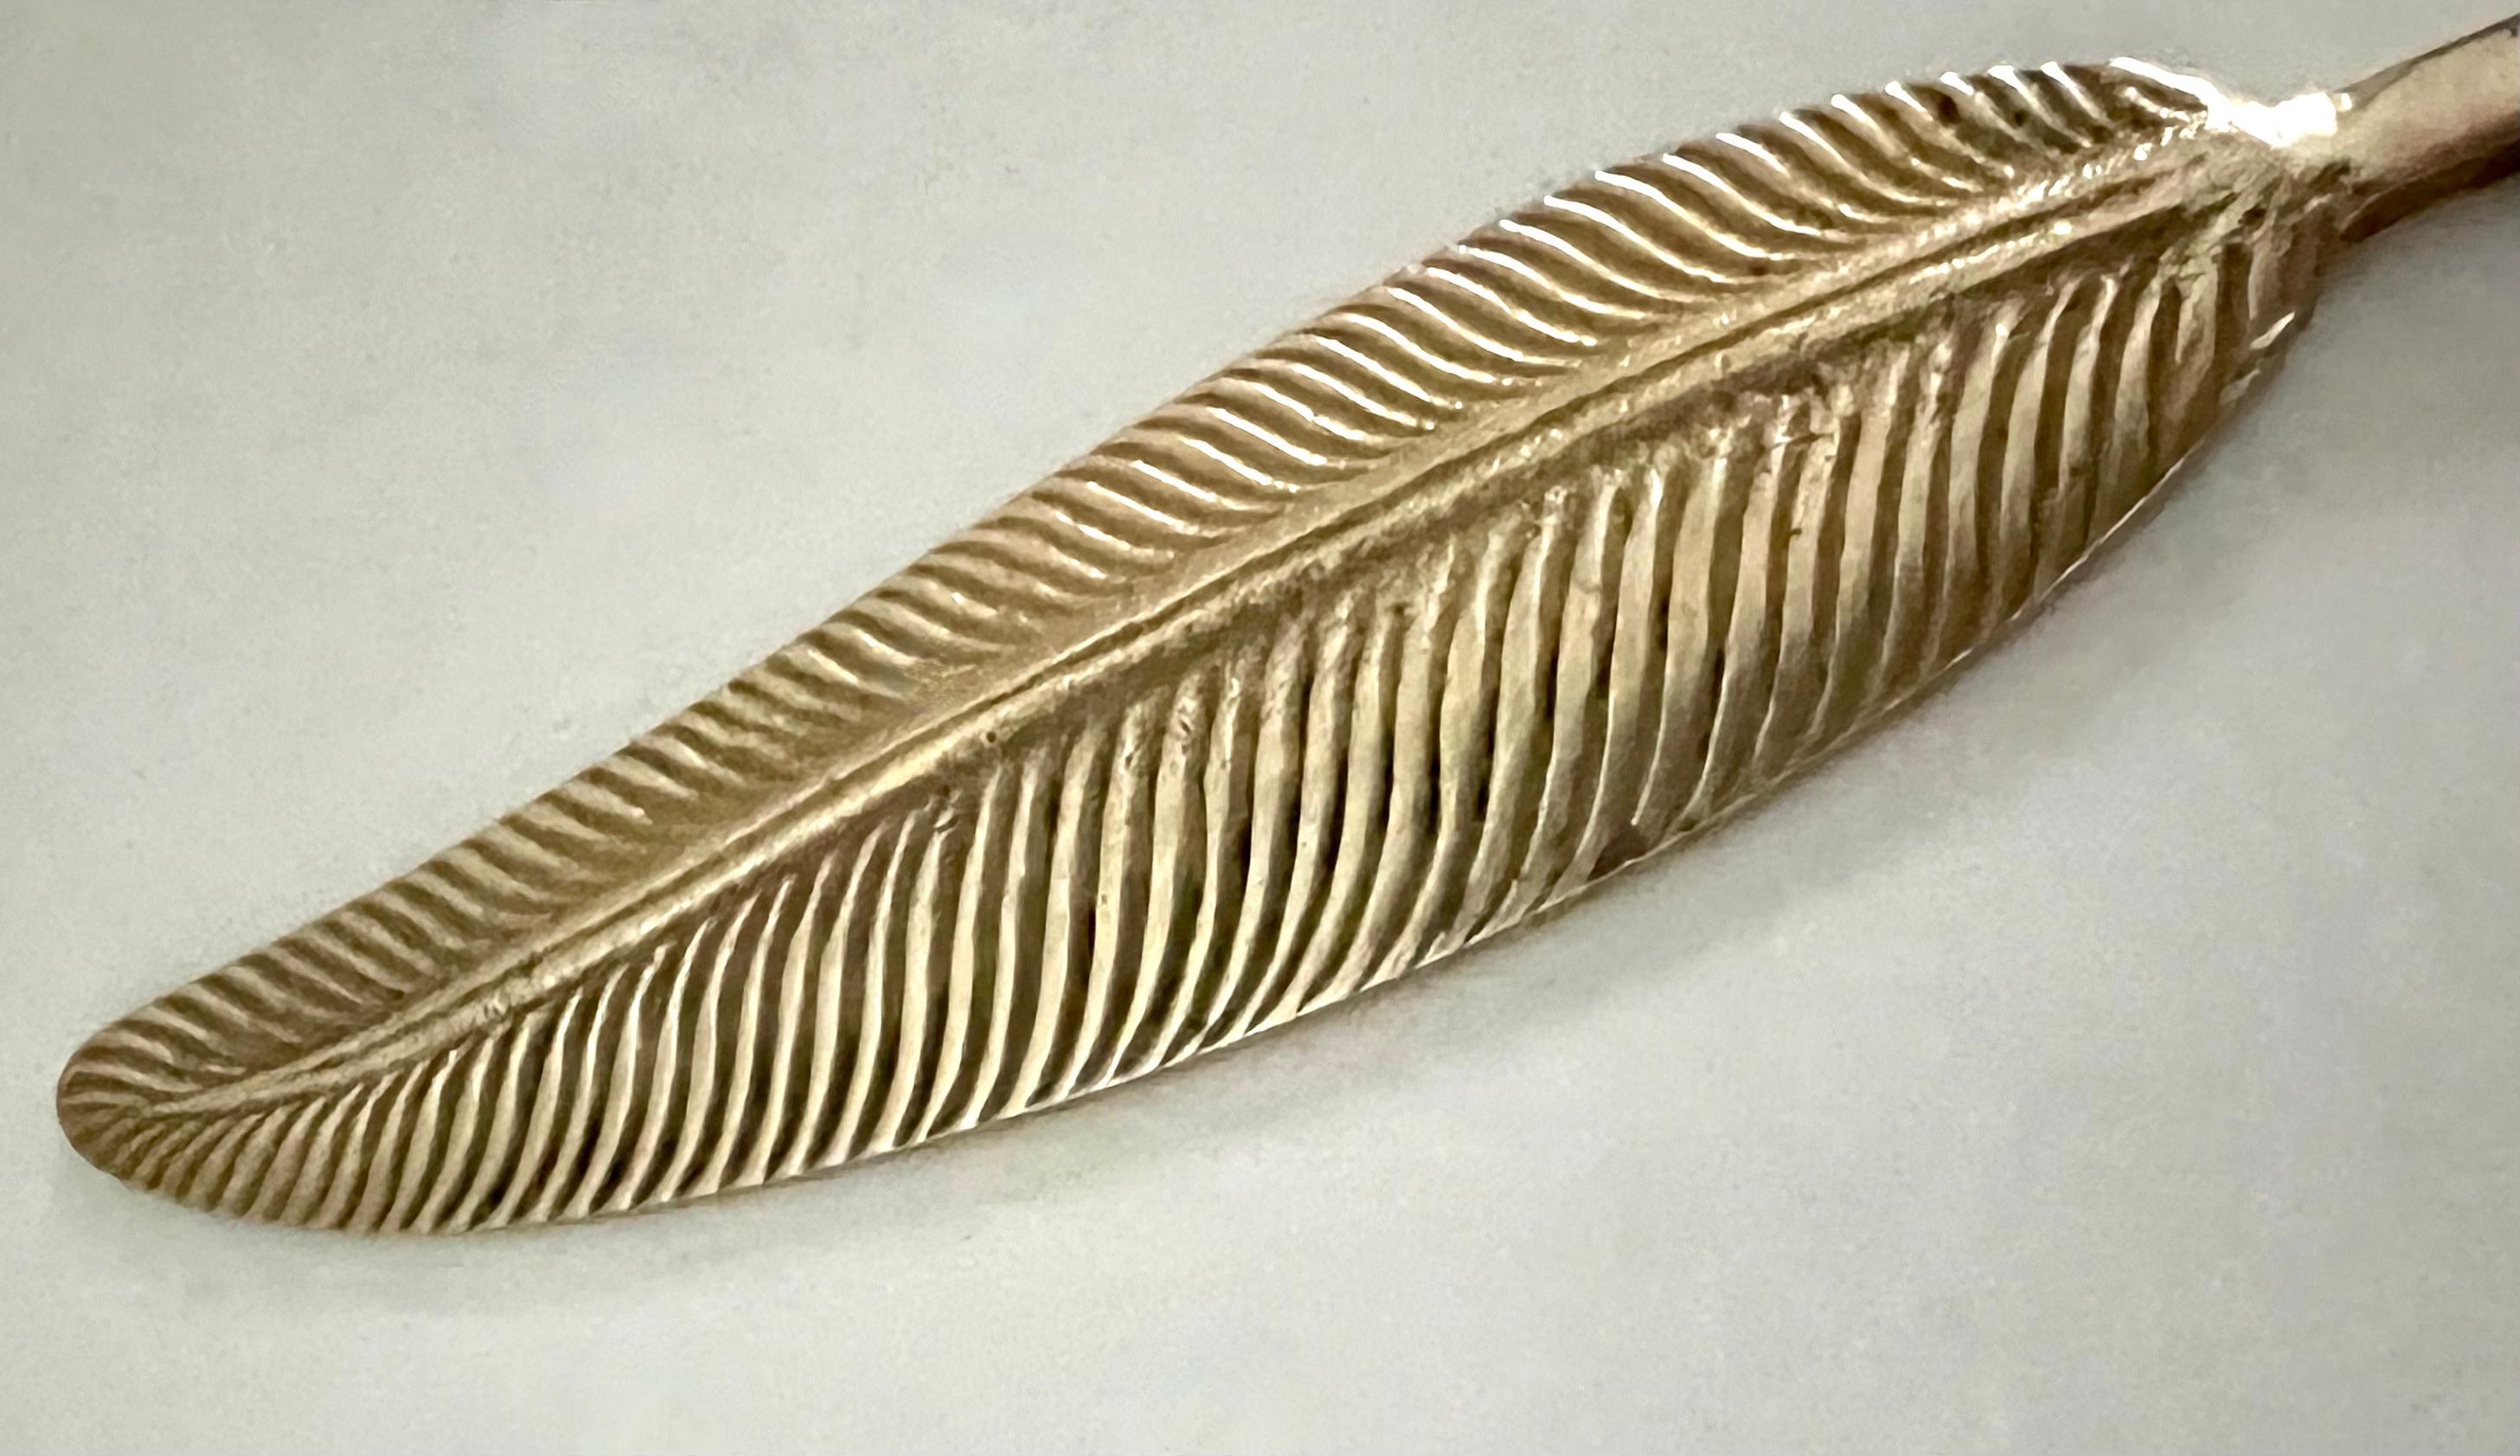 19th Century Brass Letter Opener in the shape of a feather...a lovely addition to your desk or work station. A sophisticated and elegant piece acquired in Paris France.